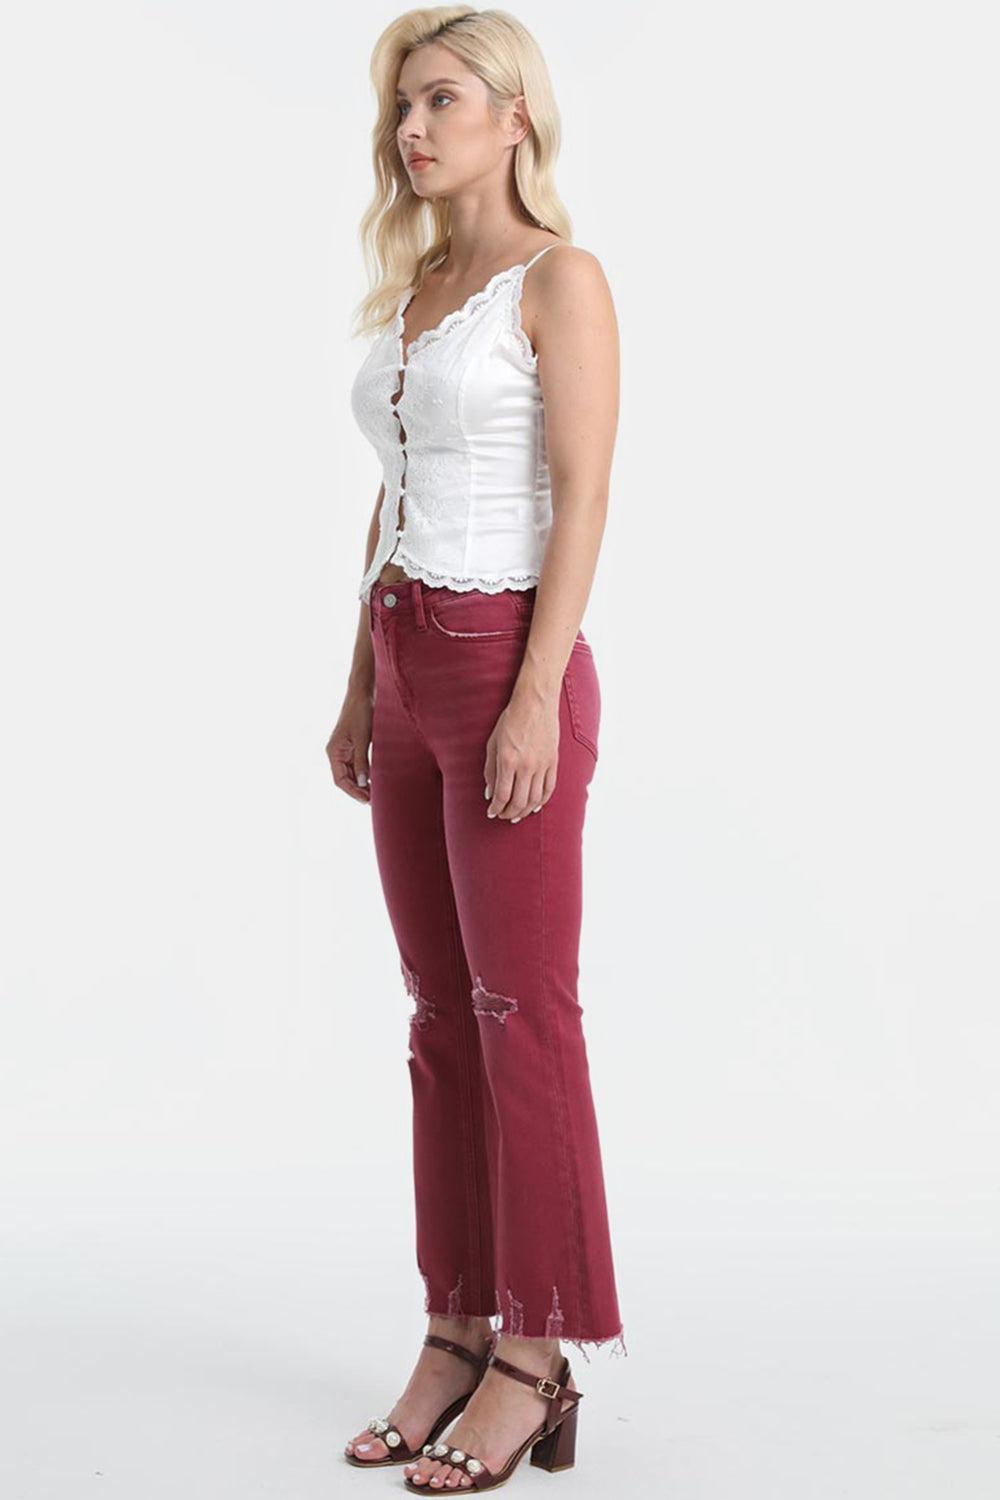 a woman in a white top and red jeans